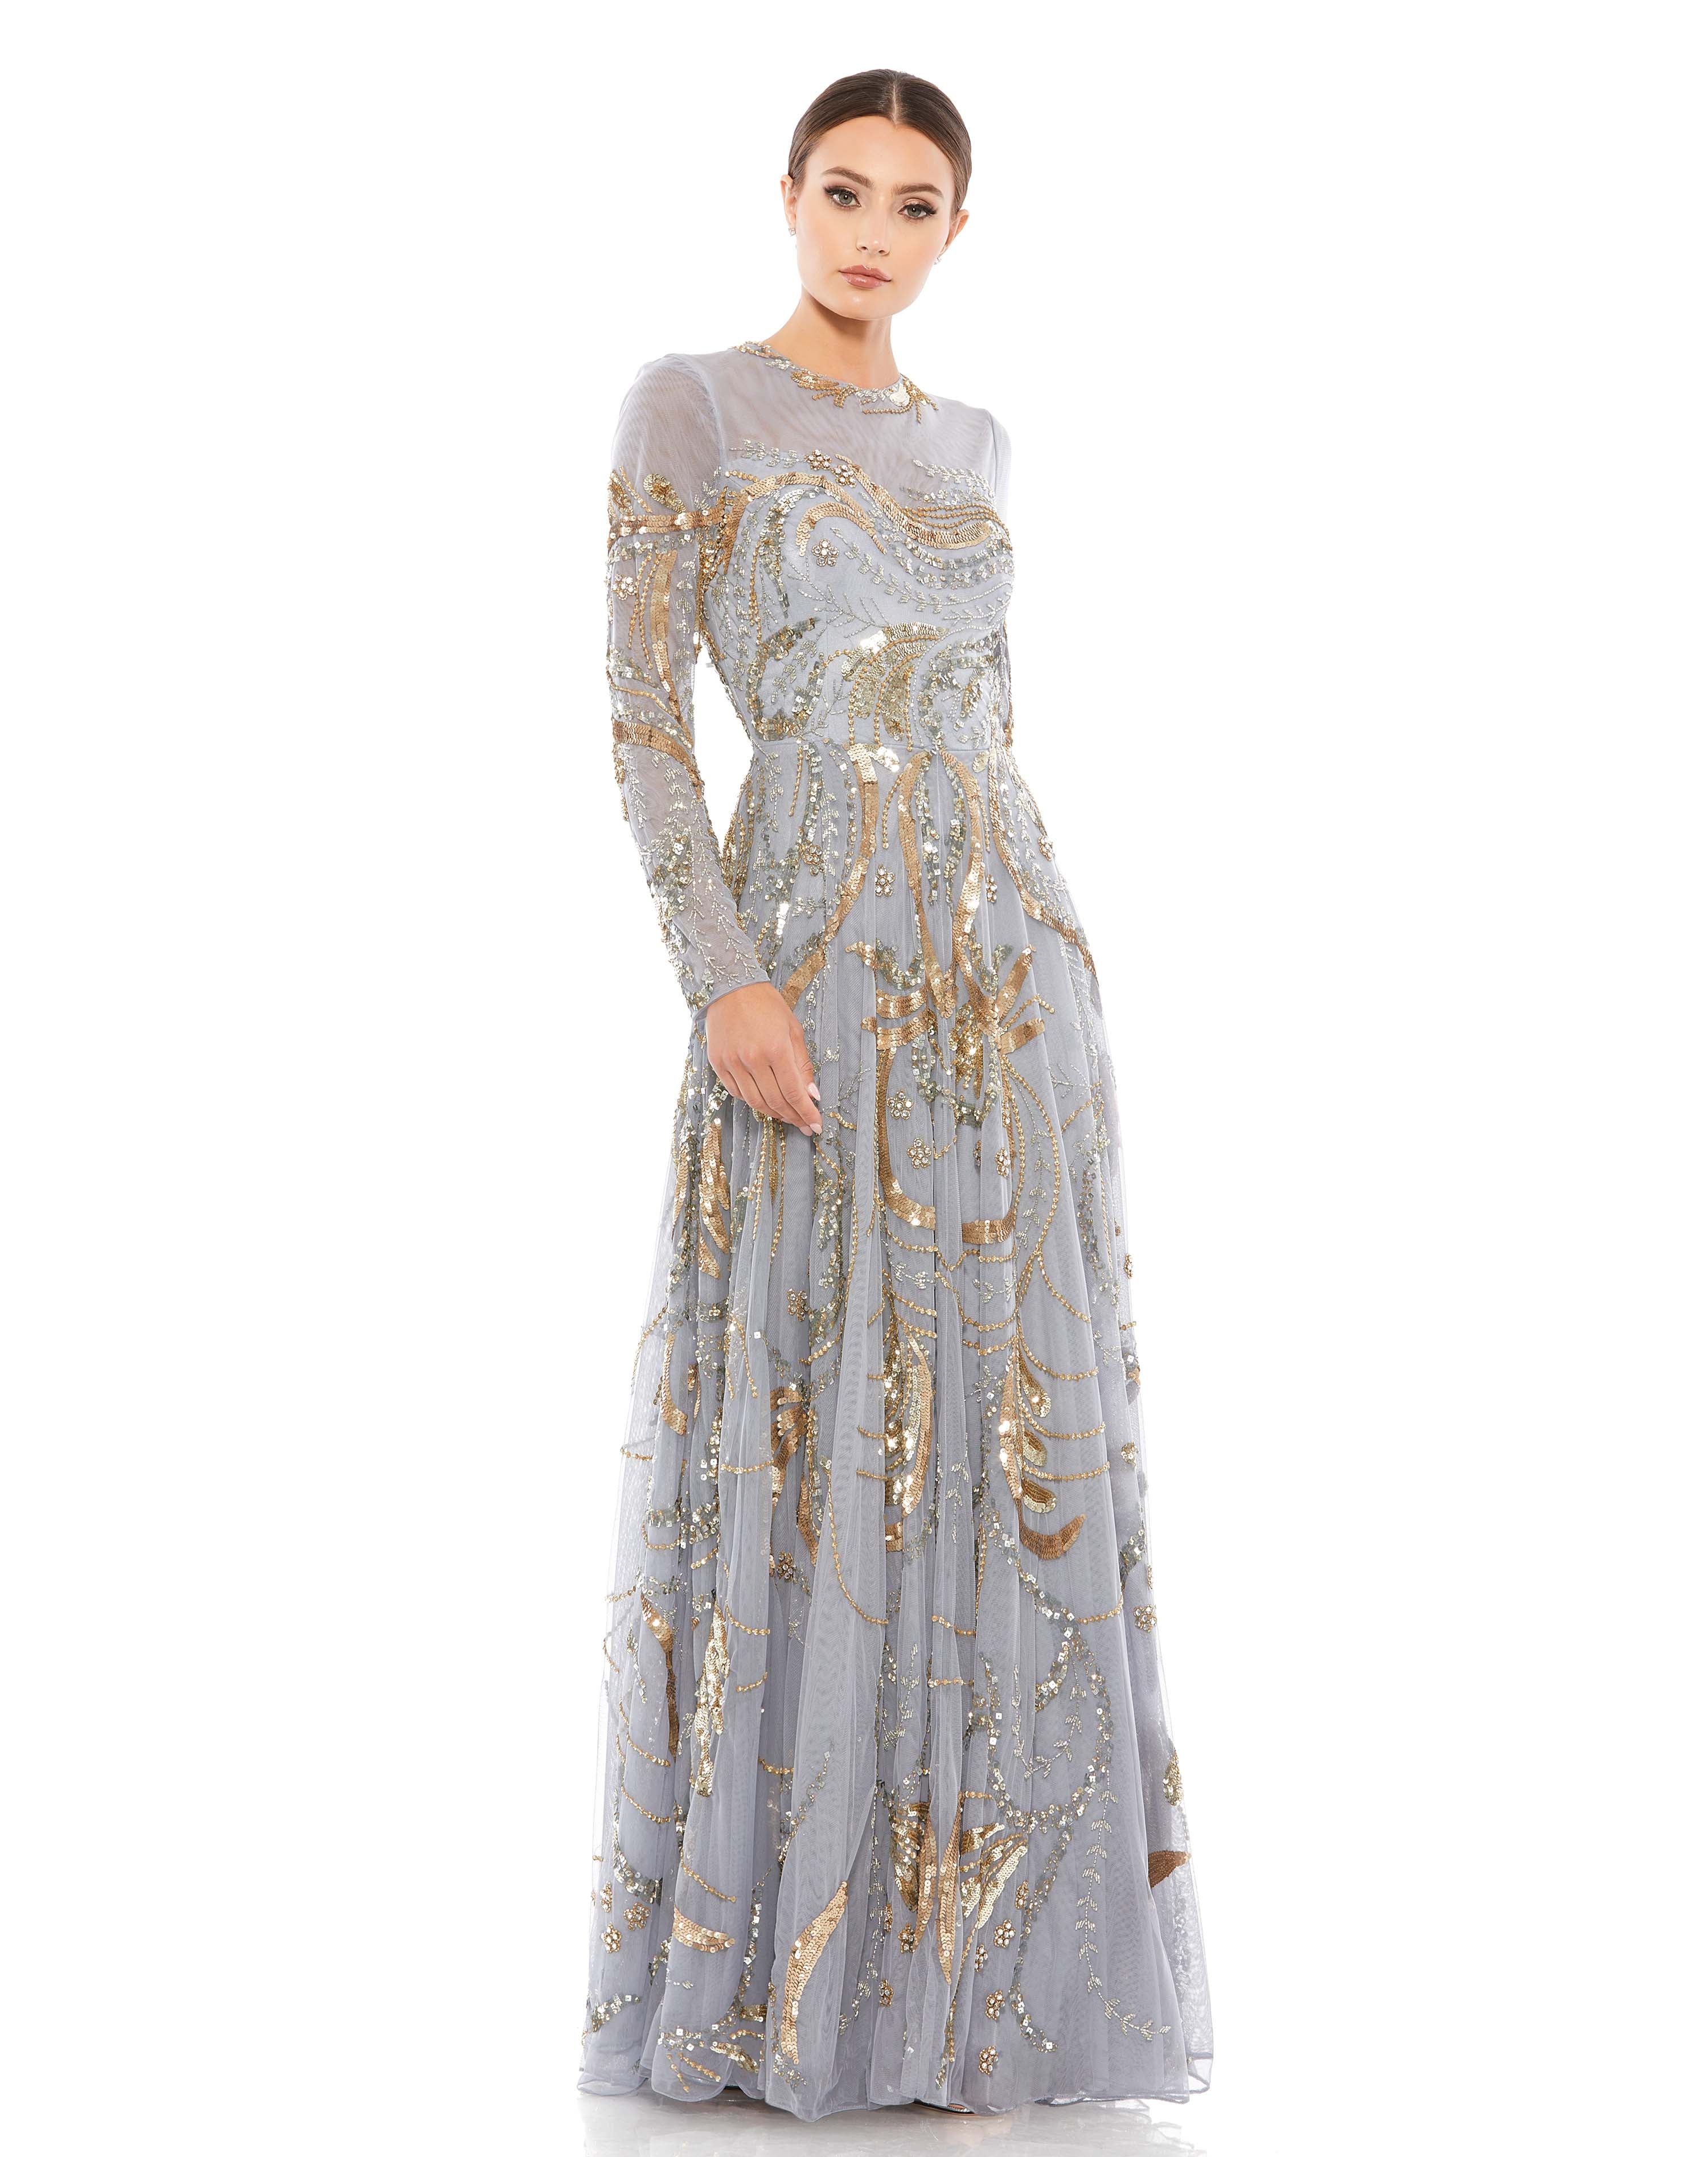 Long Sleeve Embellished Illusion Evening Gown